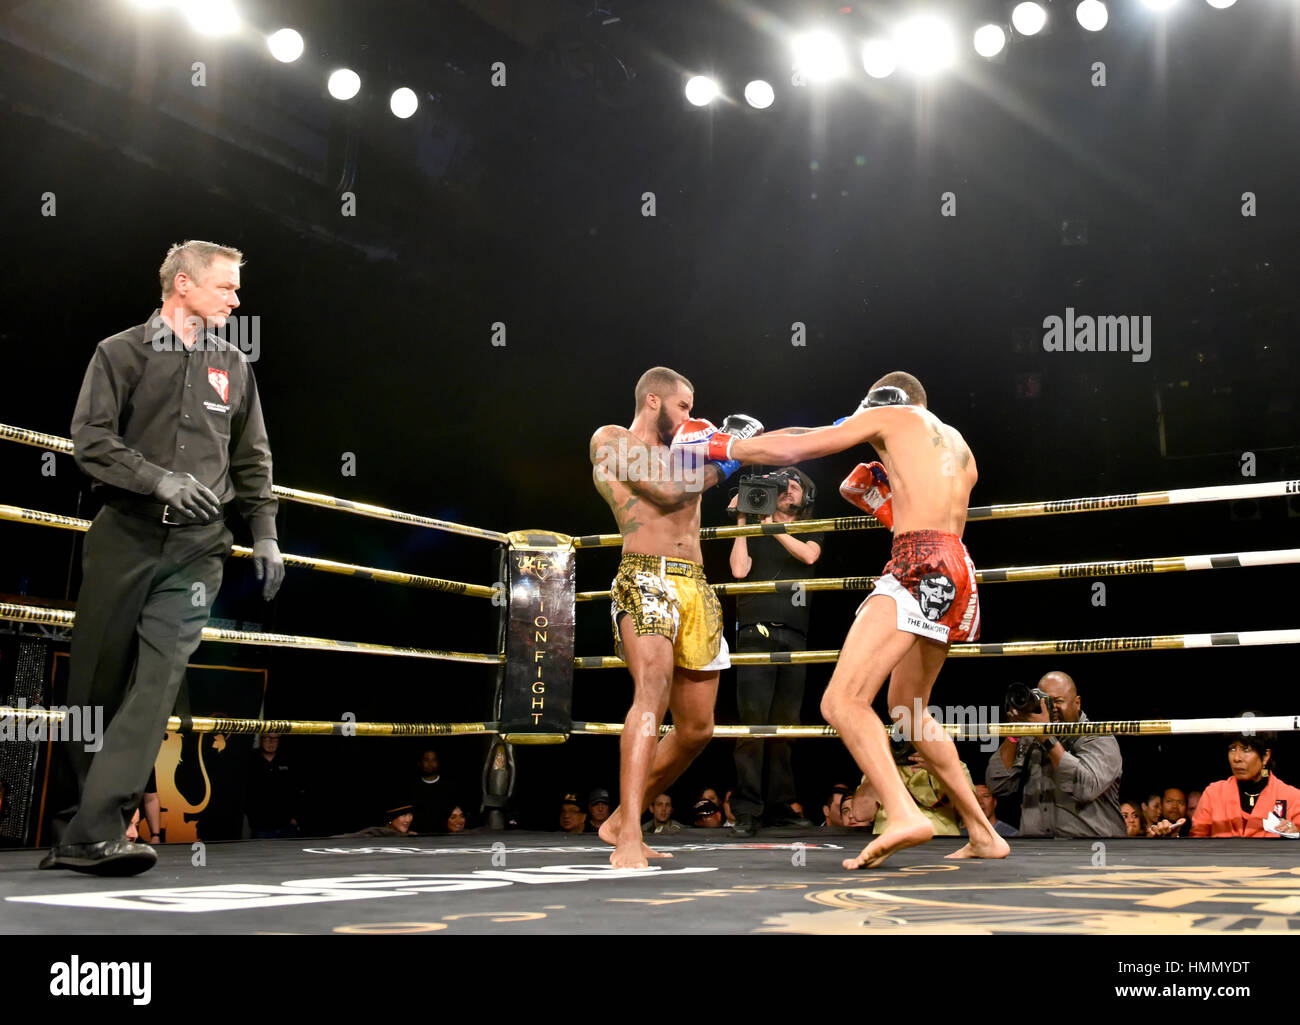 Las Vegas, USA. 03rd Feb, 2017. Las Vegas, Nevada February 3 2017 - Lion Fight 34 at the Tropicana Hotel and Casino - Regian “The Immortal” Eersel vs. D.C. Pratt – Lion Fight Super Middleweight Title - Photo Credit: Ken Howard Images Credit: Ken Howard/Alamy Live News Stock Photo